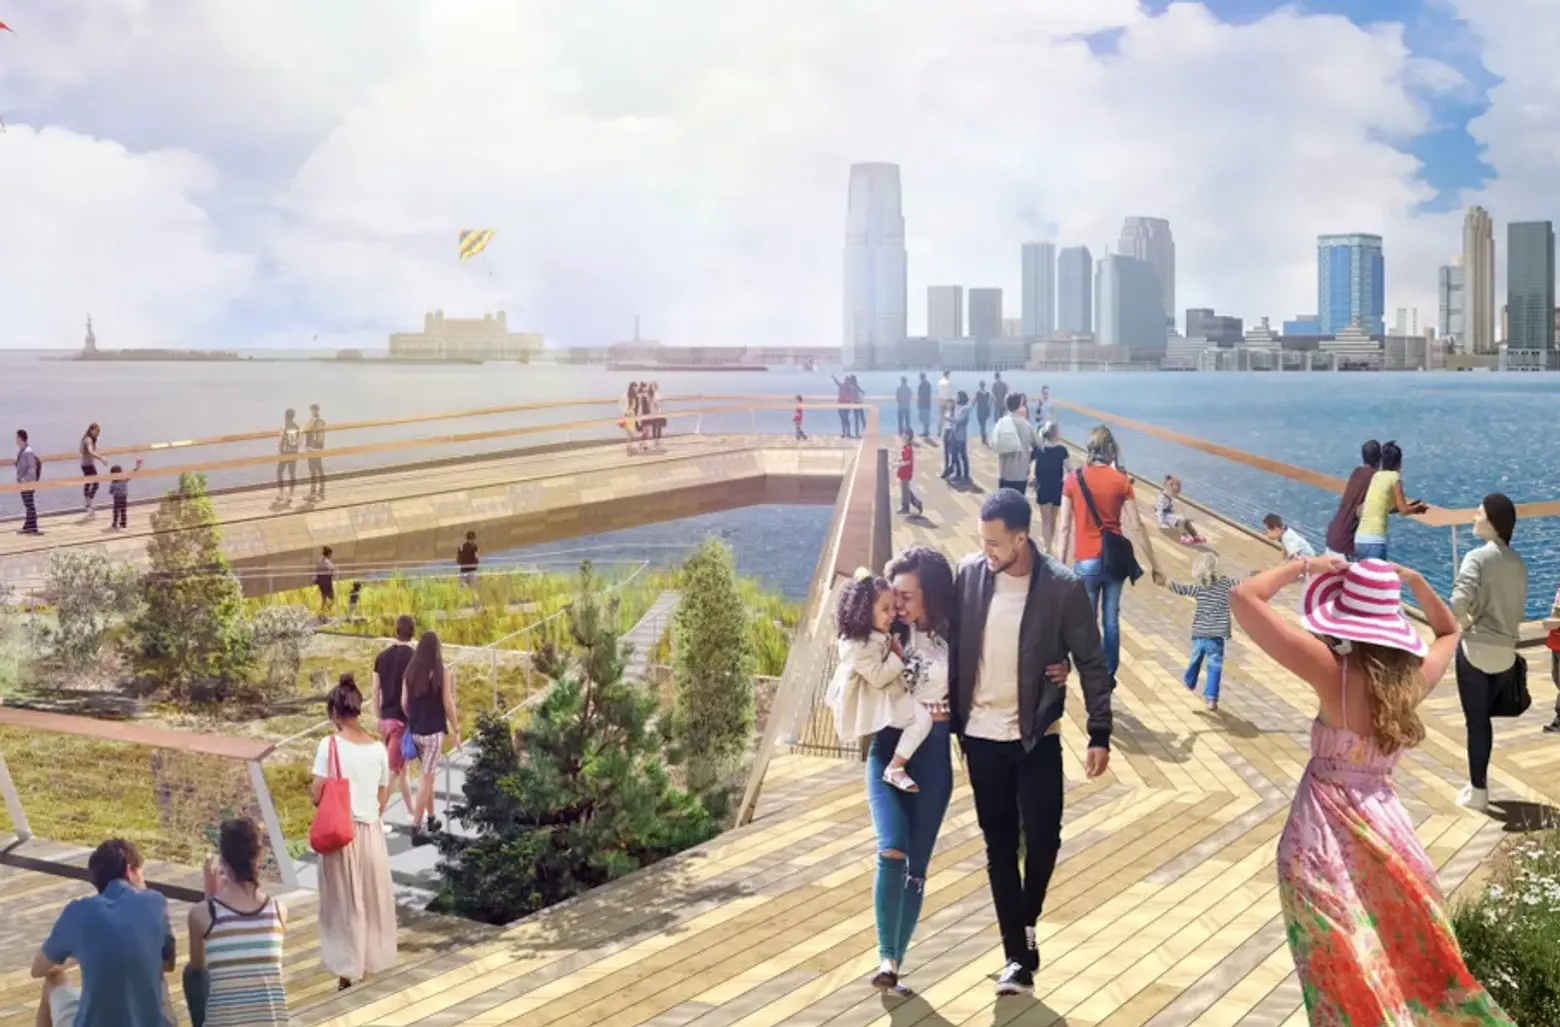 New renderings unveiled for Tribeca’s educational, eco-focused park at Pier 26